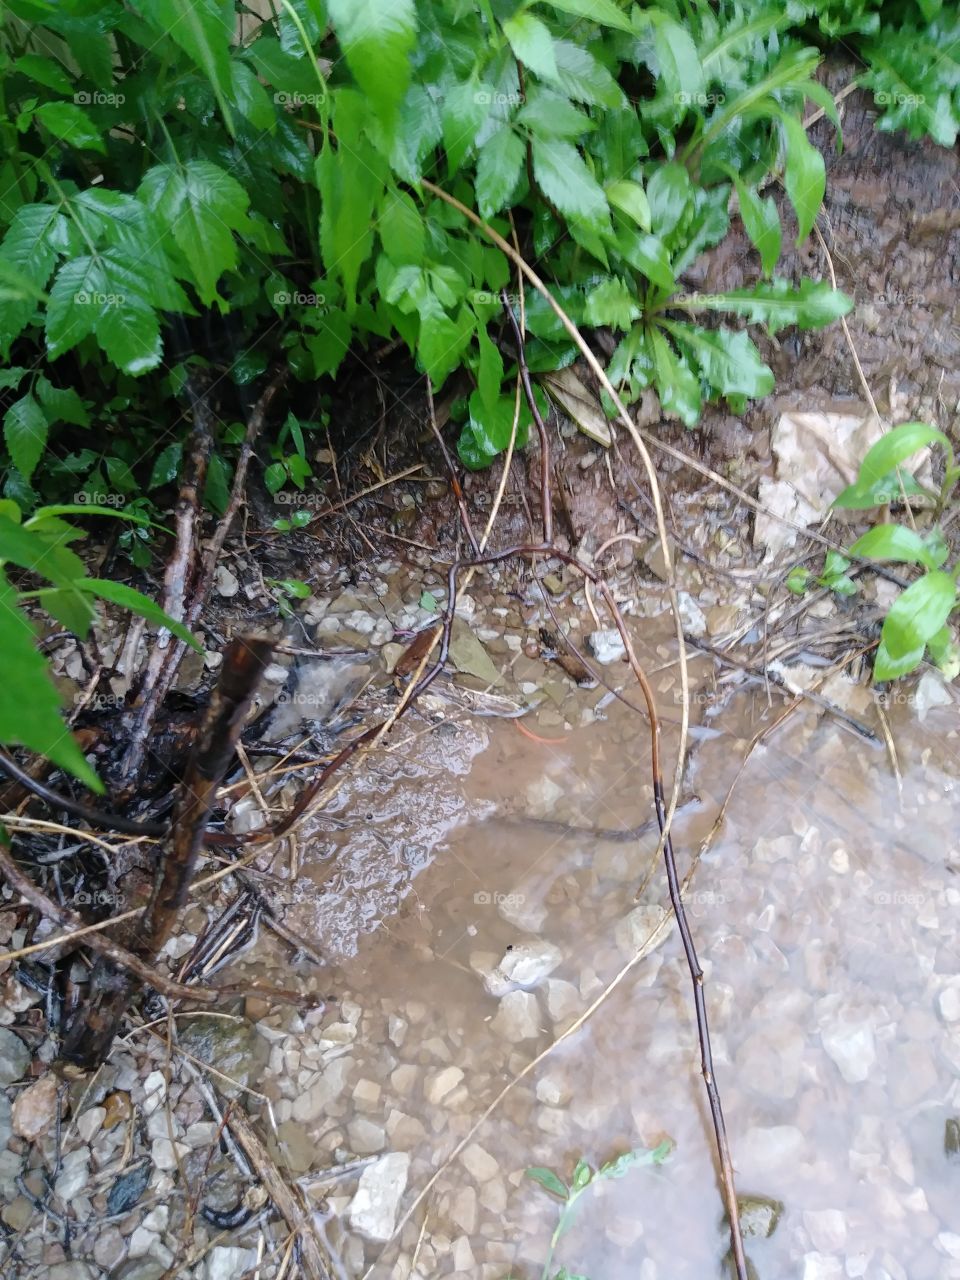 Rain flows over the edge of a puddle near my home in rural west virginia.